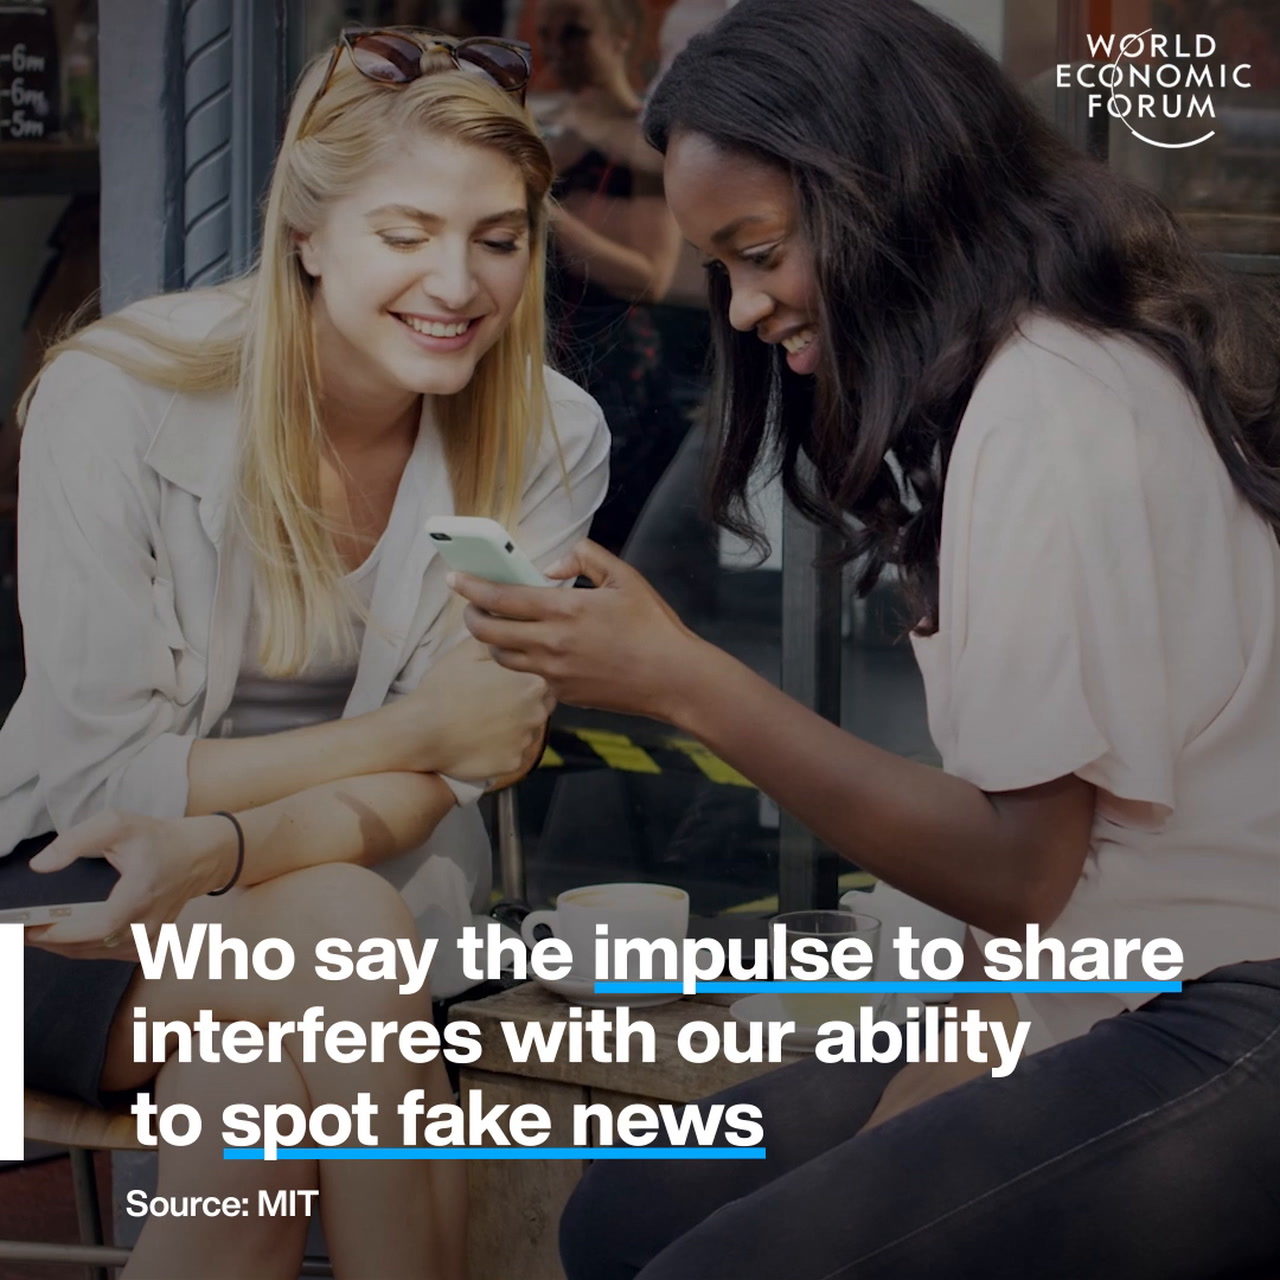 The Impulse to Share Lowers Our Ability to Spot Fake News